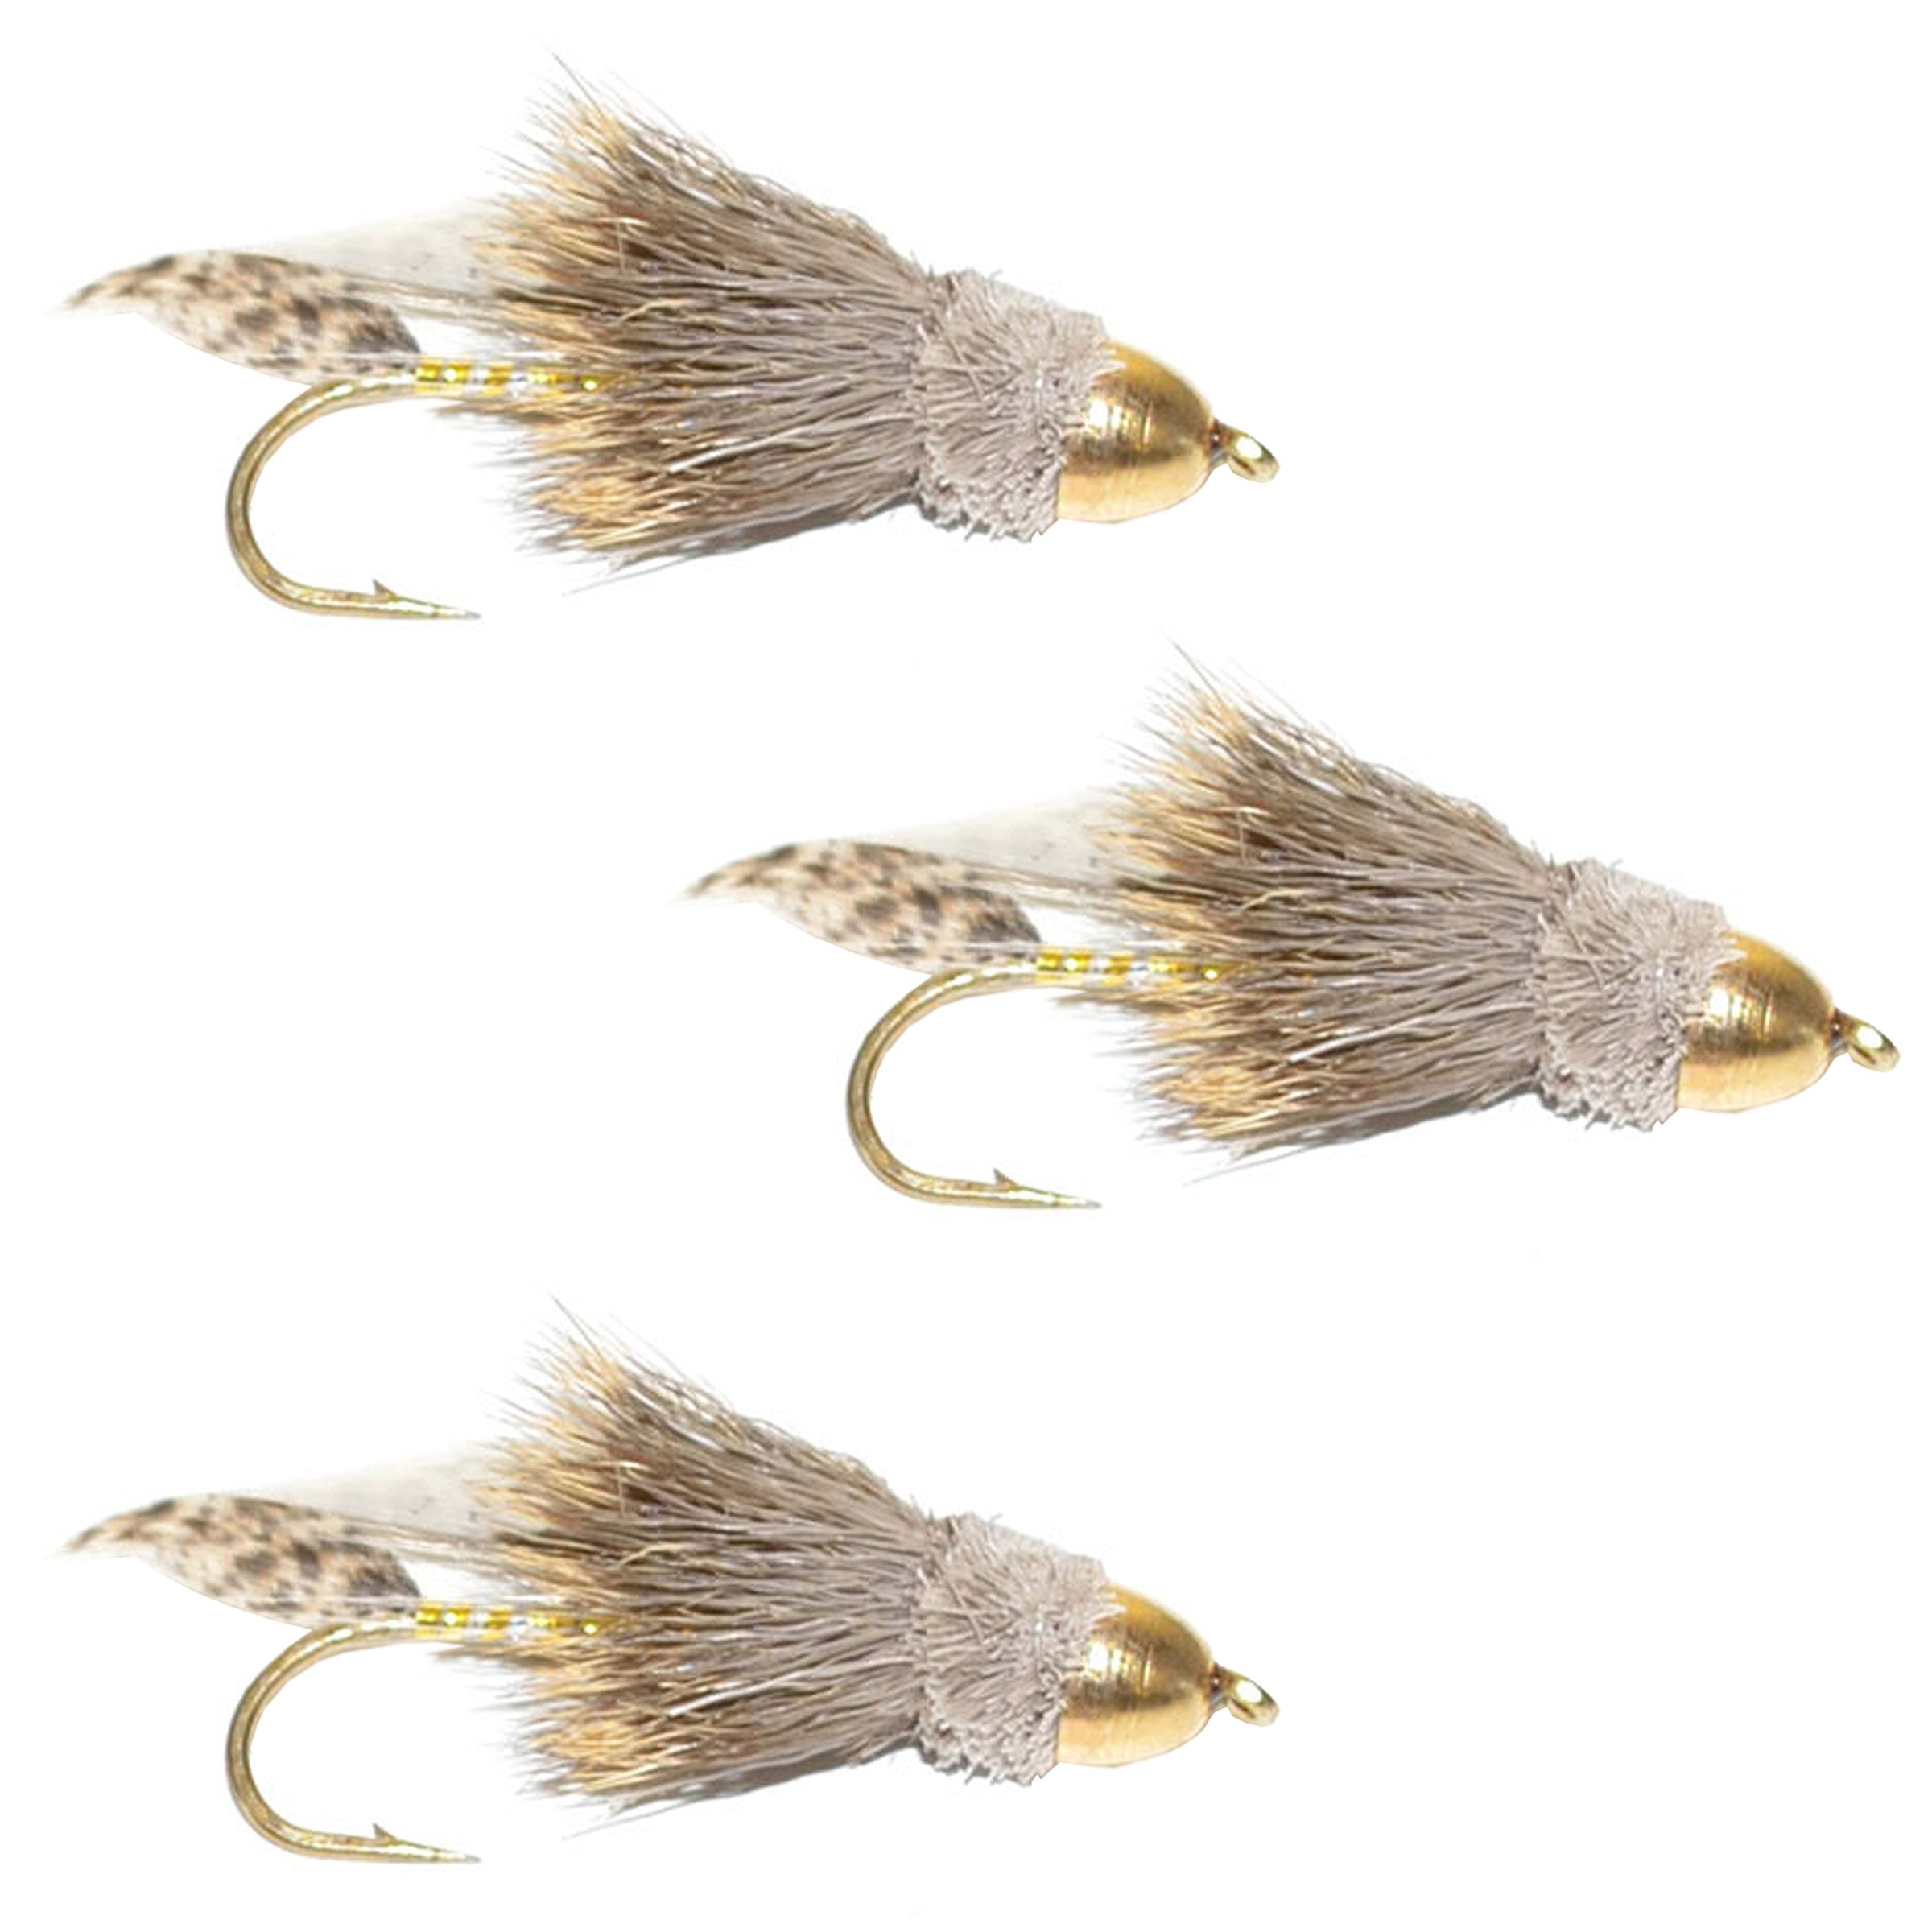 3 Pack Cone Head Muddler Minnow Trout and Bass Streamer Fly - Hook Siz